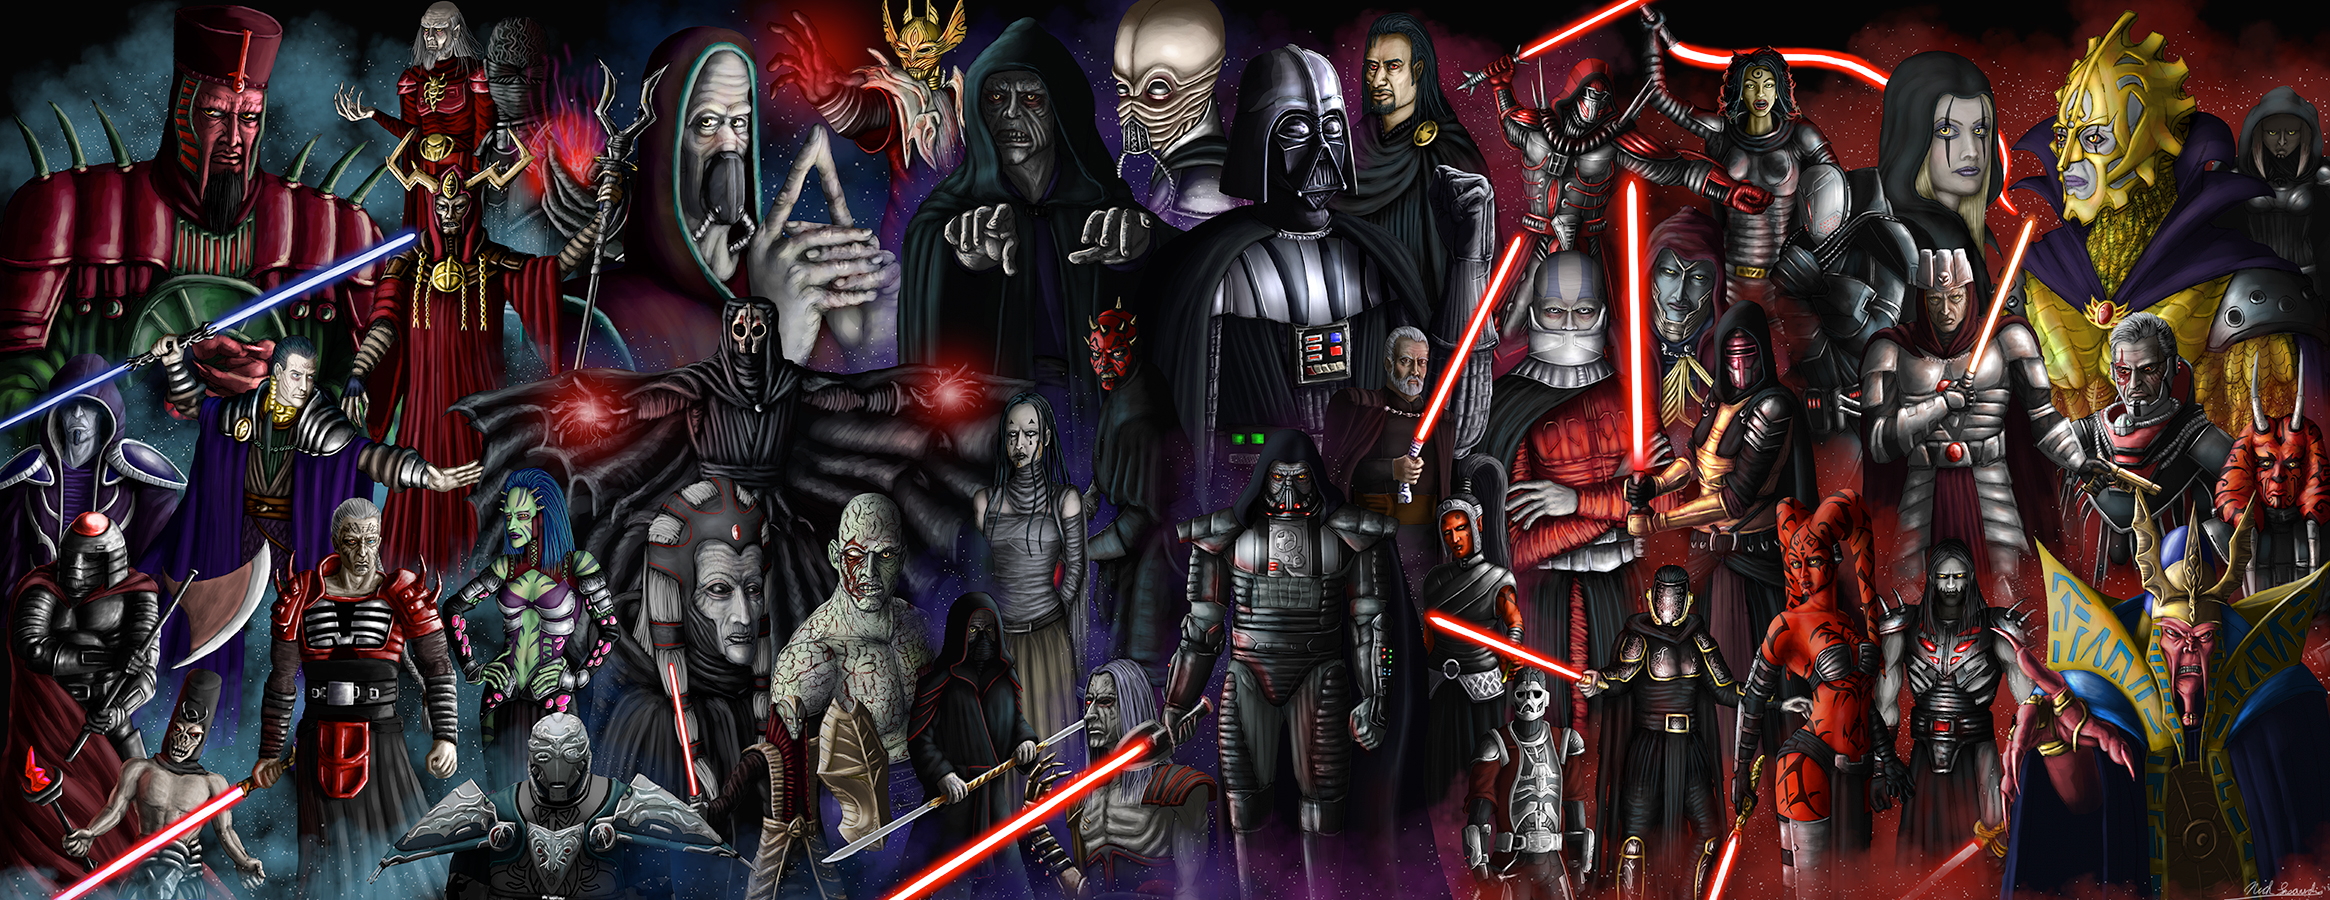 Sith Lords Wallpaper The sith lords by mr